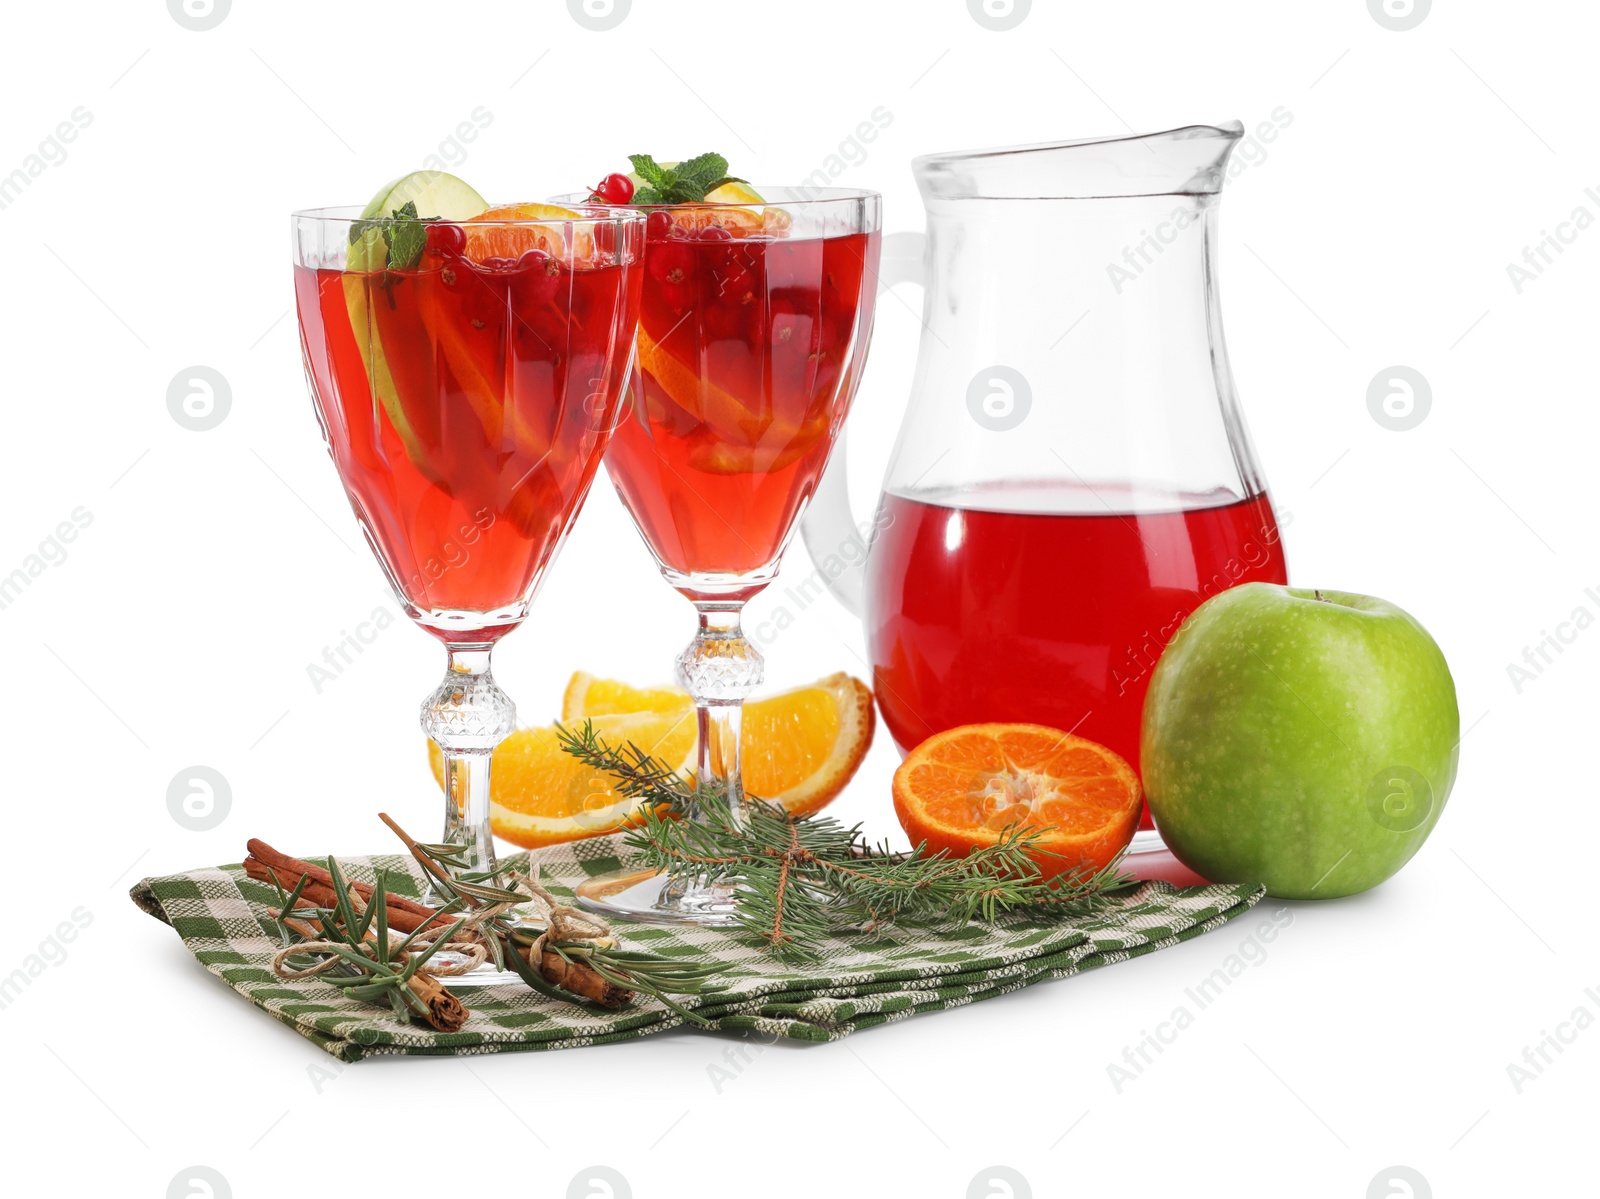 Photo of Christmas Sangria cocktail in glasses and jug, ingredients and fir tree branch isolated on white